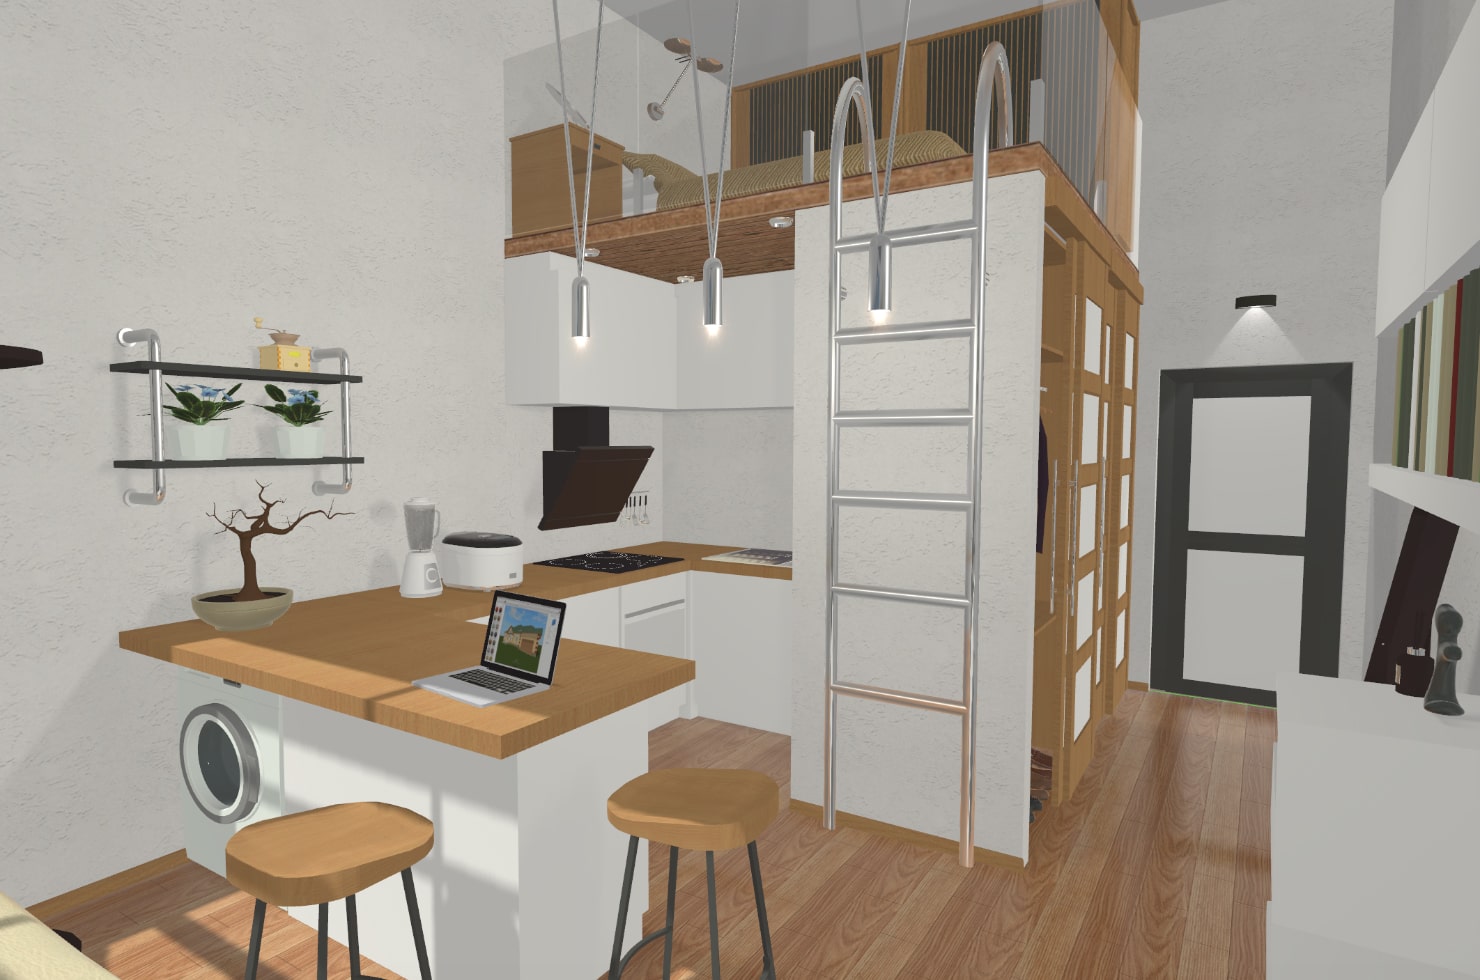 https://www.livehome3d.com/assets/img/articles/space-saving-furniture/tiny-apartment@2x.jpg